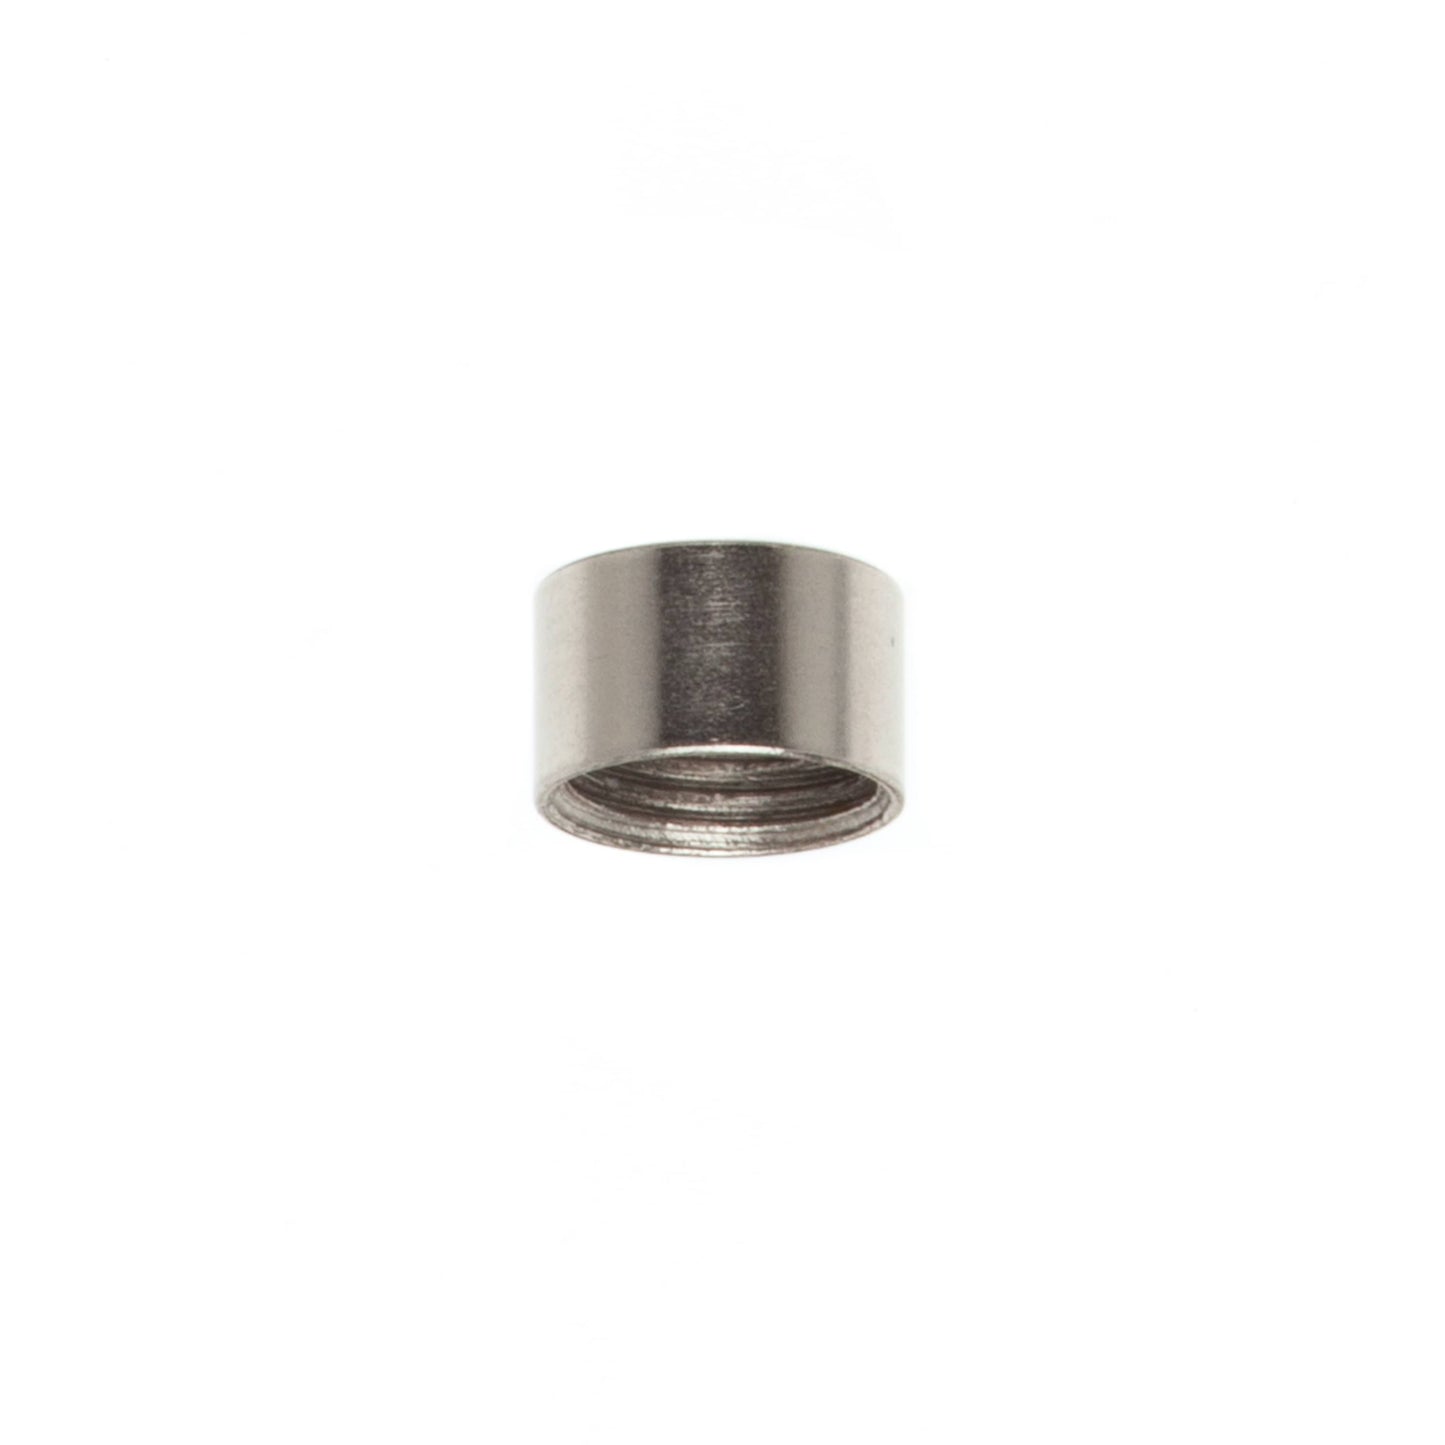 Tubing/Pipe Thread Cover